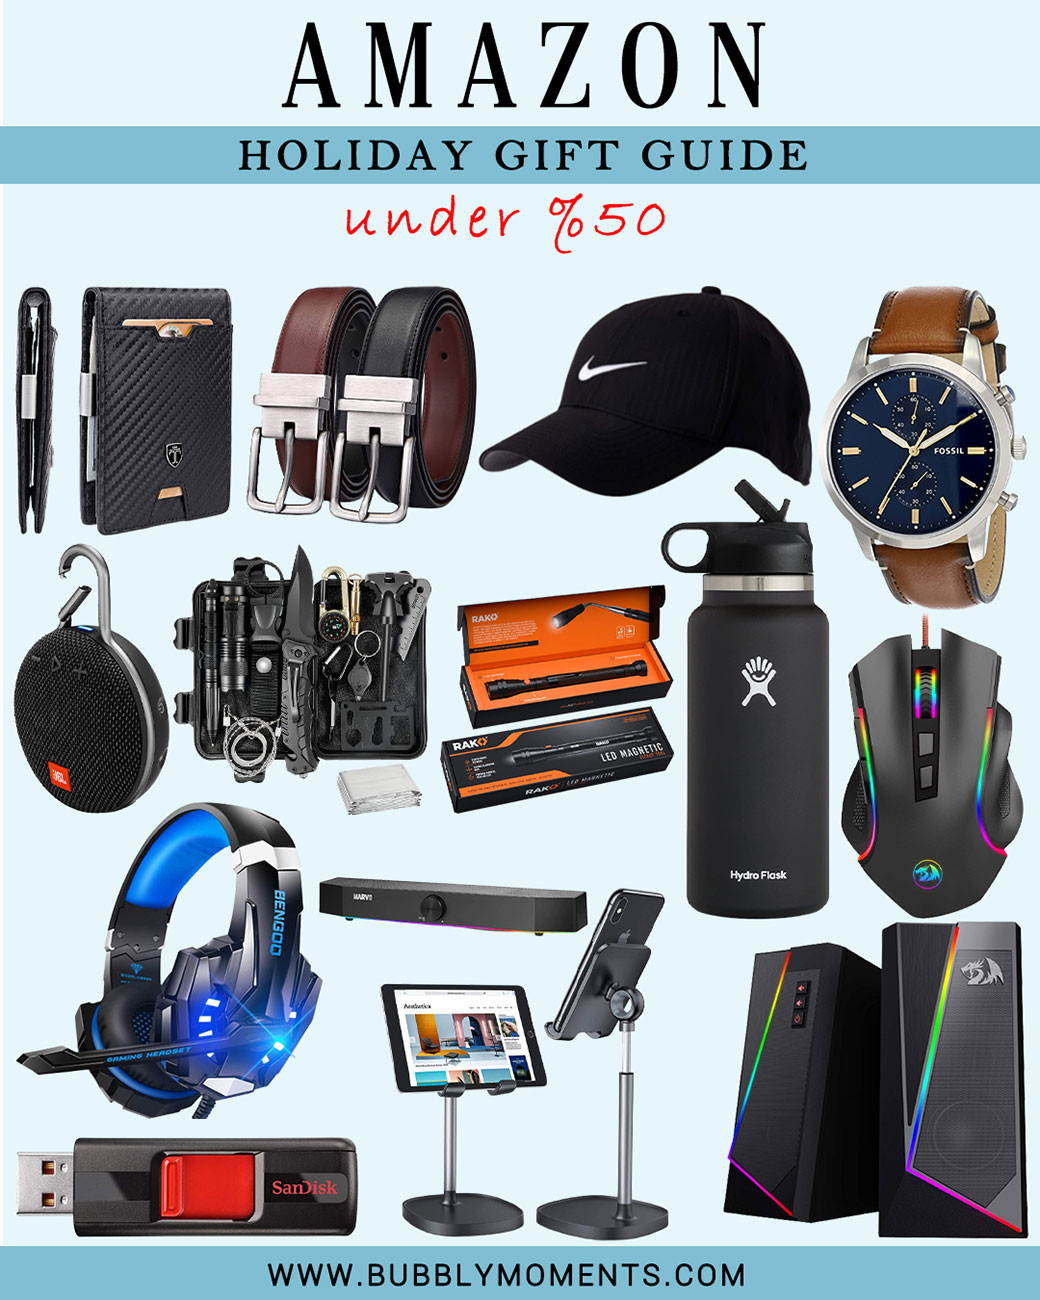 Gifts for him | Christmas gifts for men | Gifts for men | Gift ideas for men | Best gifts for men | Fossil Townsman Quartz Chronograph Watch | ZENOTTIC Polarized Sunglasses | BENGOO Stereo Gaming Headset | JBL Clip 3 Portable Waterproof Wifi Bluetooth Speaker | Mens Slim Wallet with Money Clip | Survival Kit 14 in 1 | Tactical Kit for Hiking Hunting | Telescoping Magnet Stick LED Lights | Adjustable Phone Stand for Desk | Redragon Desktop PC Stereo Speakers | Bubbly Moments